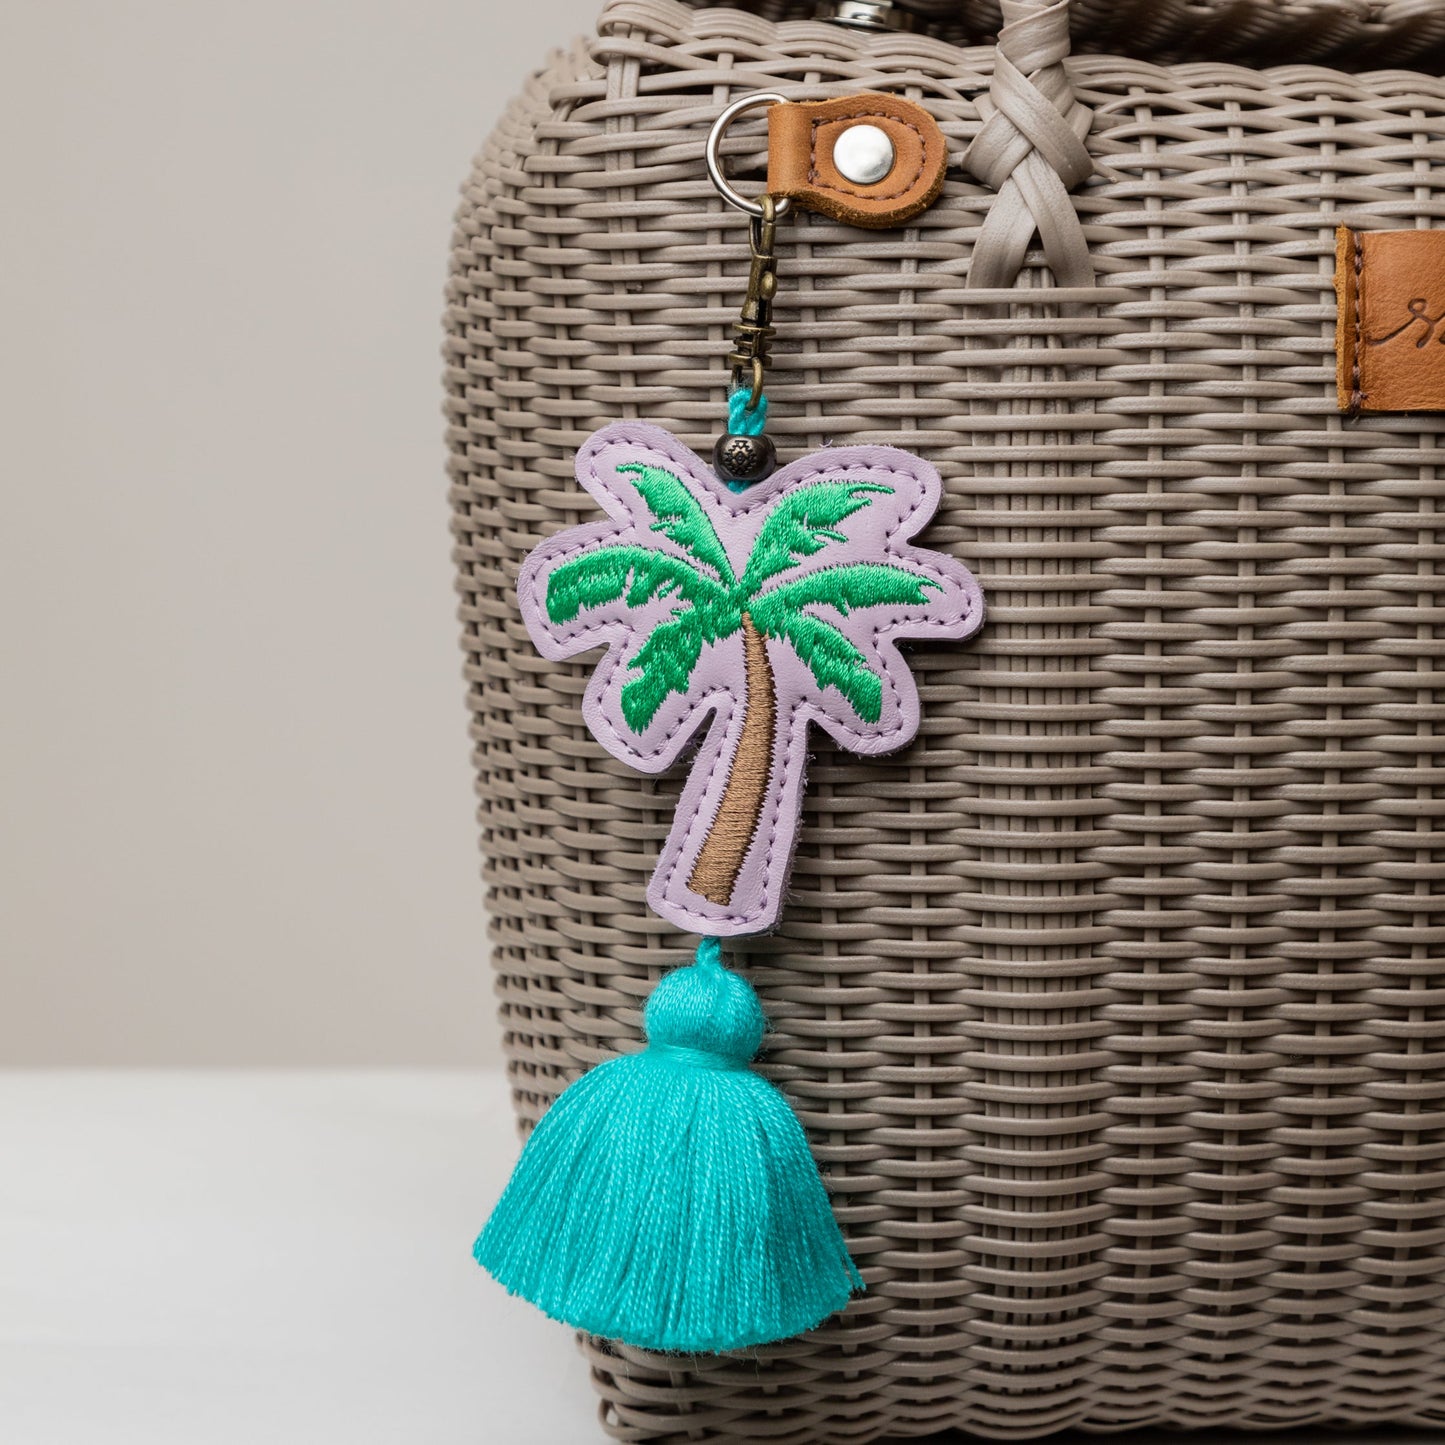 EMBROIDERED PALM TREE CHARM - LEATHER CHARM WITH TASSEL